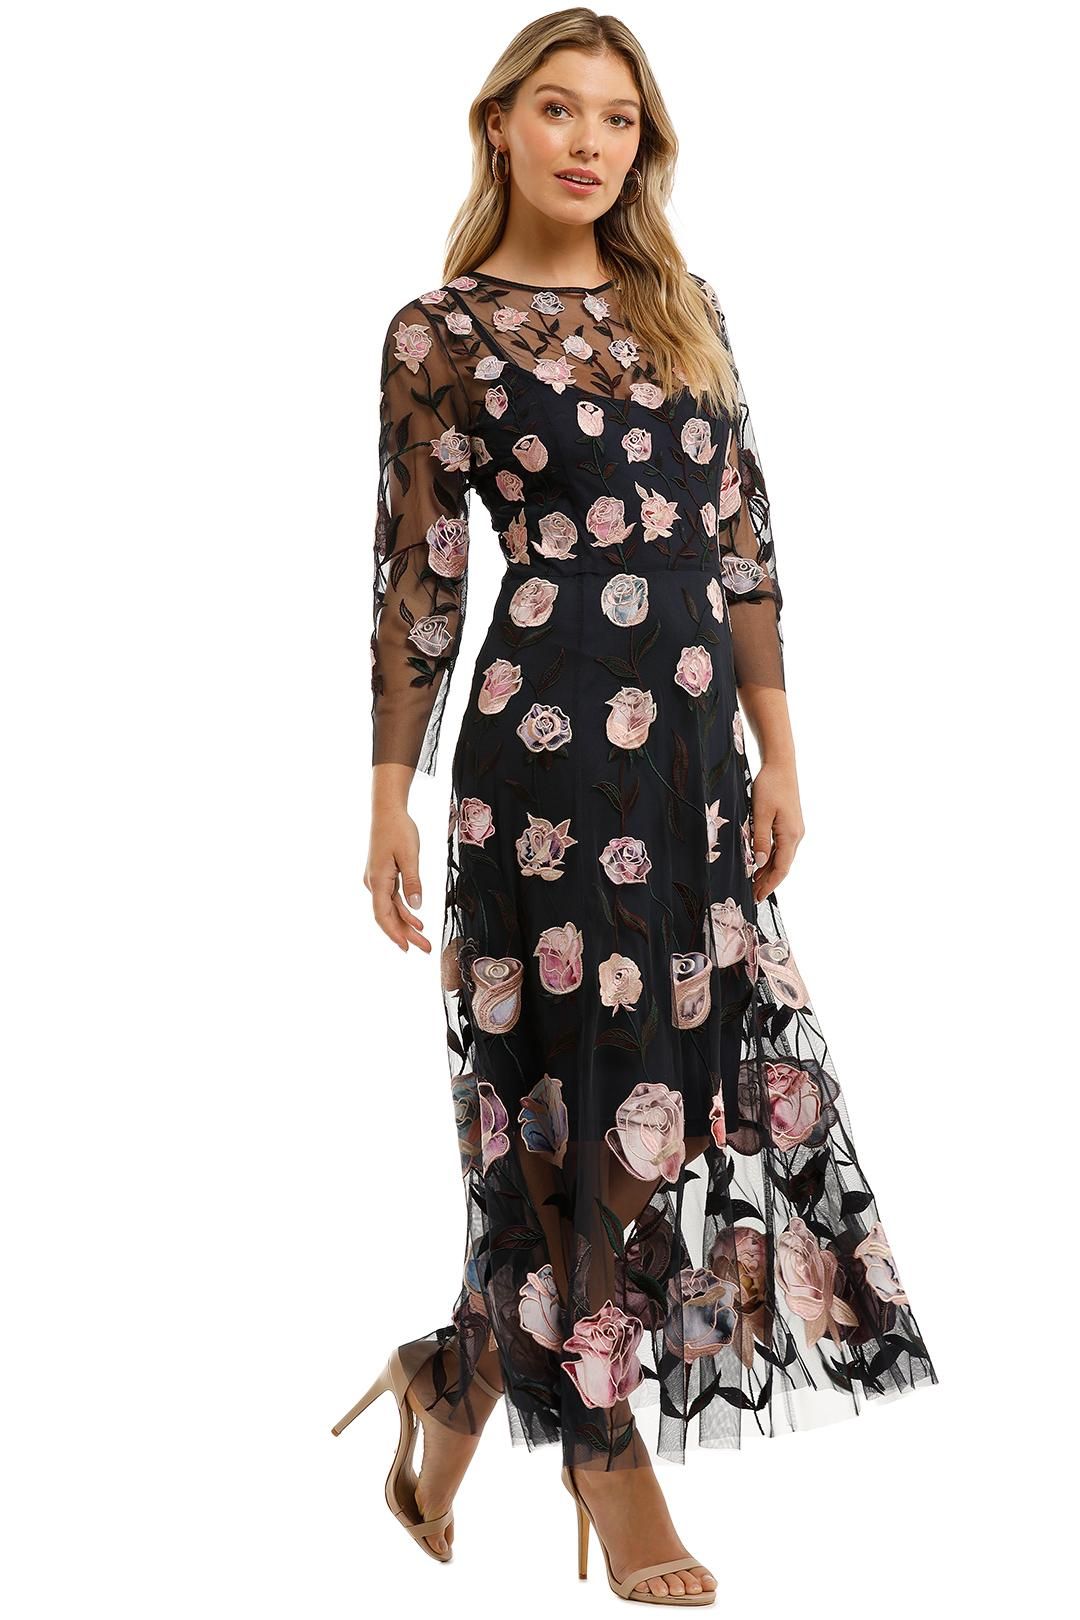 Moss and Spy Patricia Dress Navy Rose Embroidery